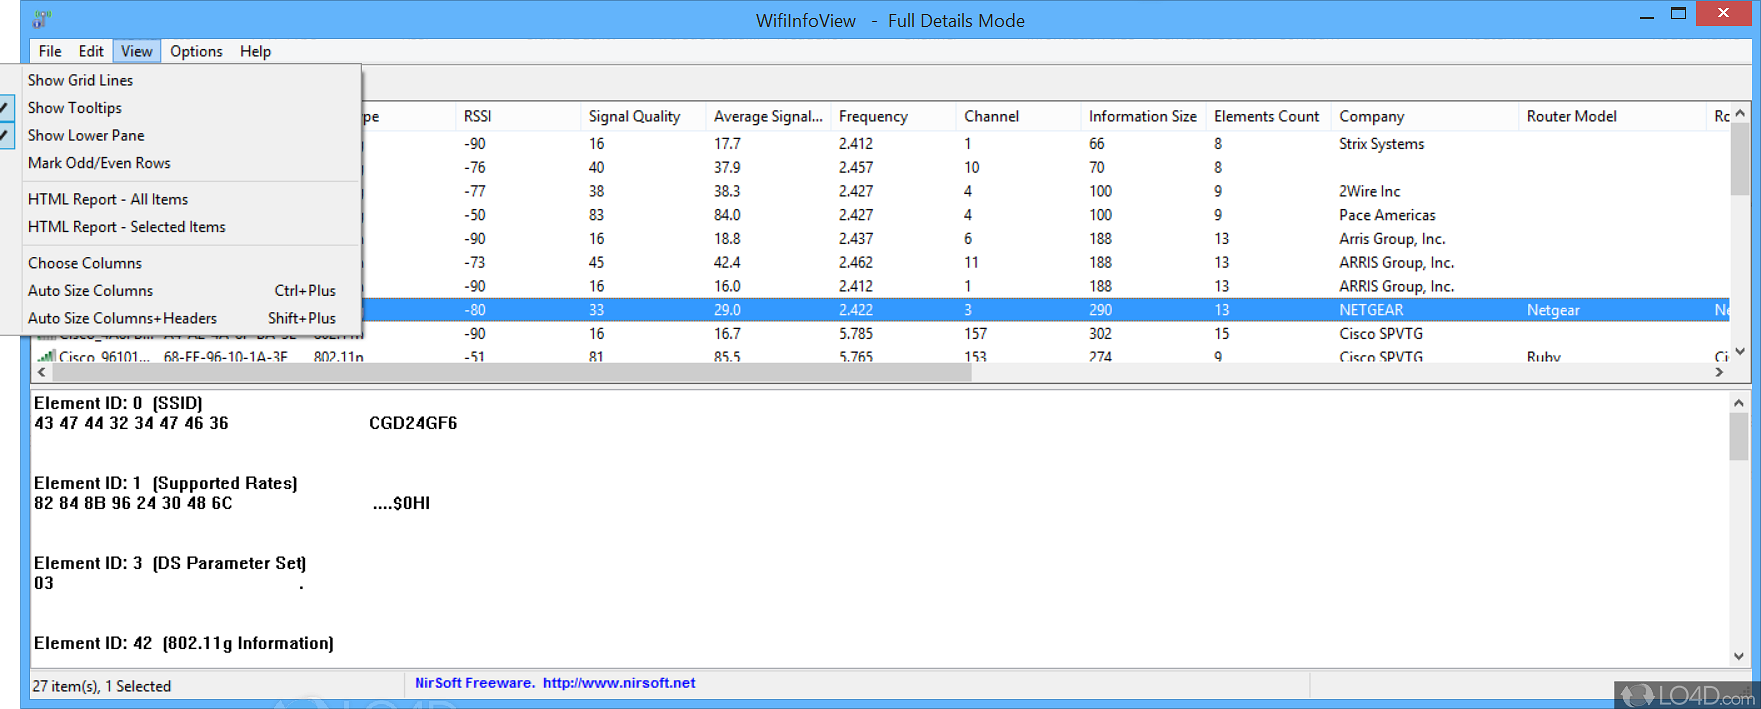 WifiInfoView 2.91 download the new version for apple